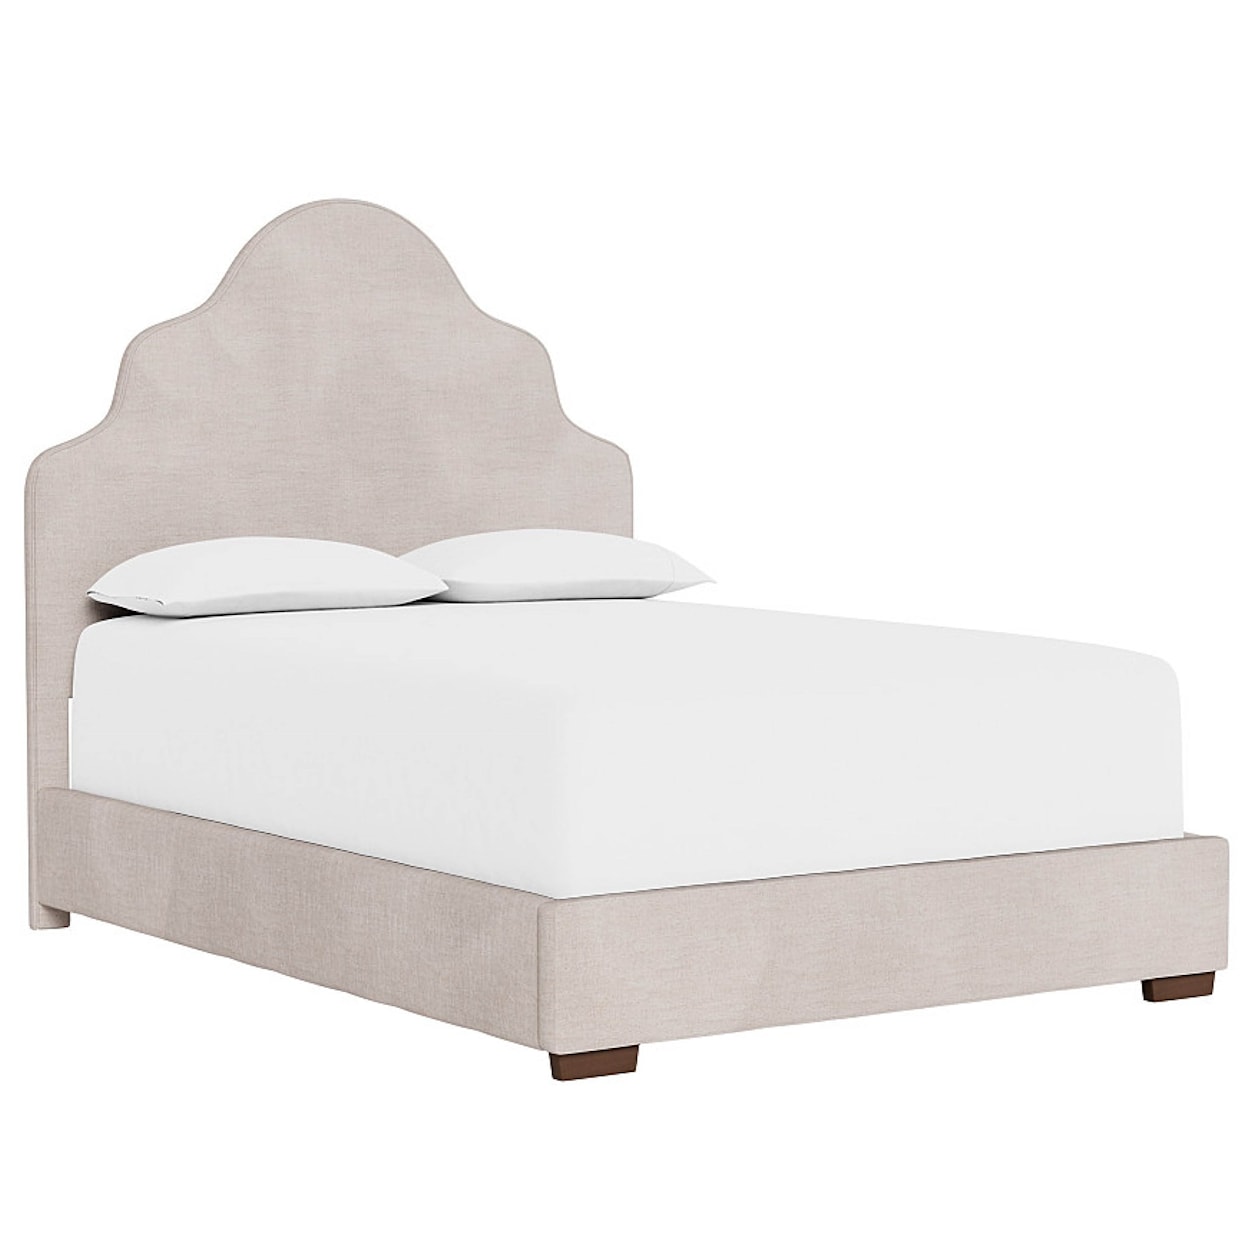 Universal UO Queen Sagamore Hill Bed